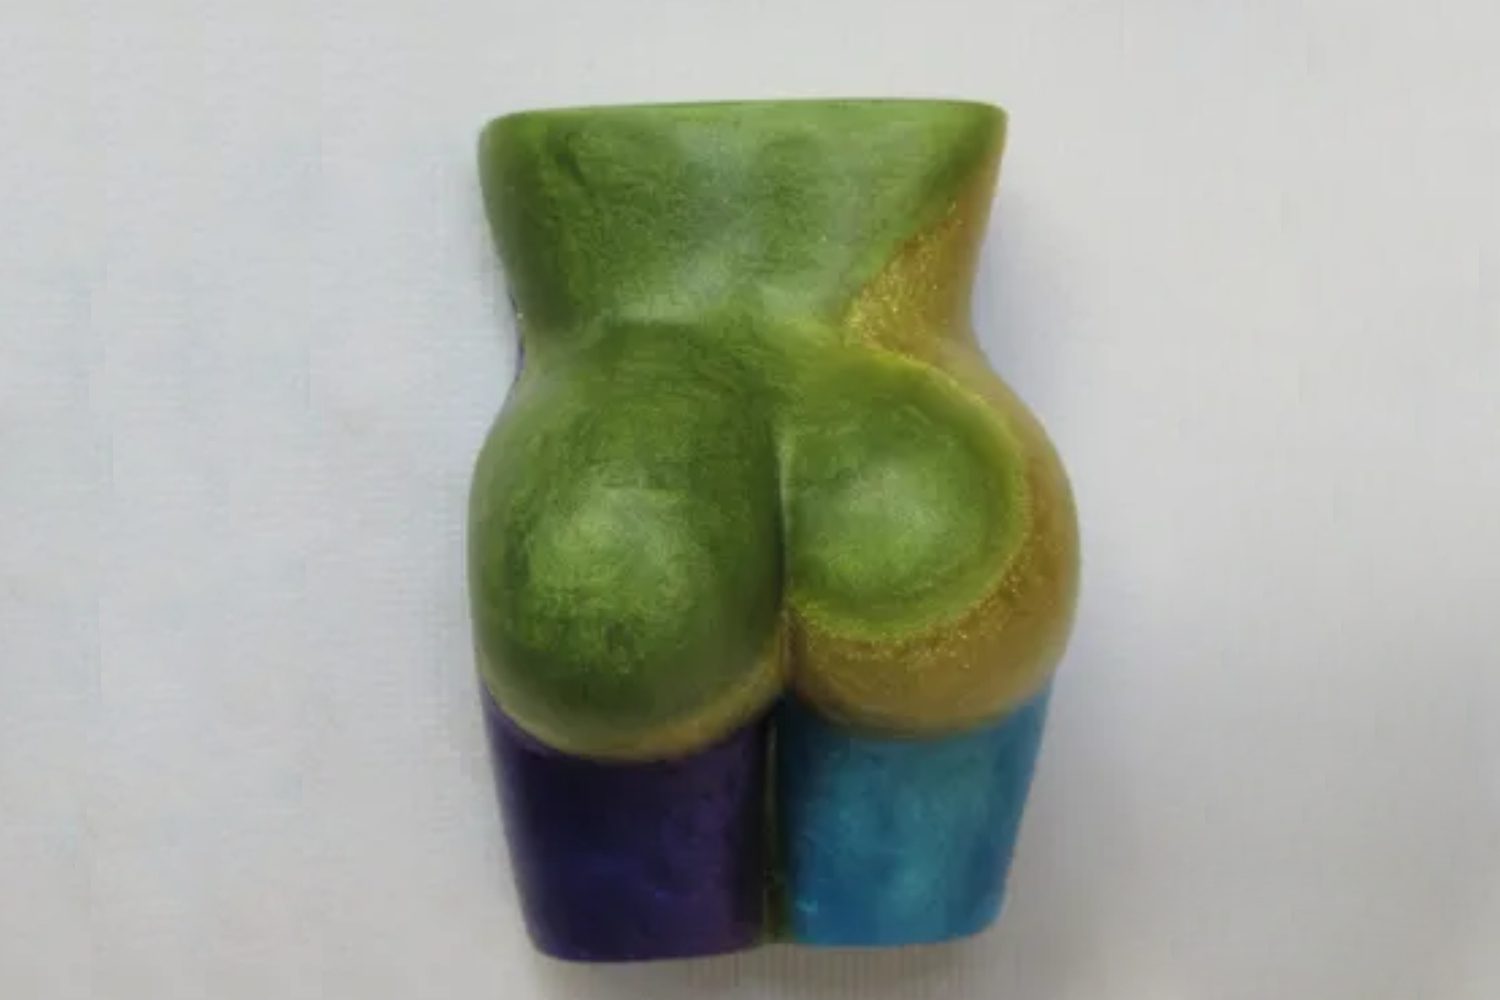 A green and blue butt sculpture on top of a white surface.